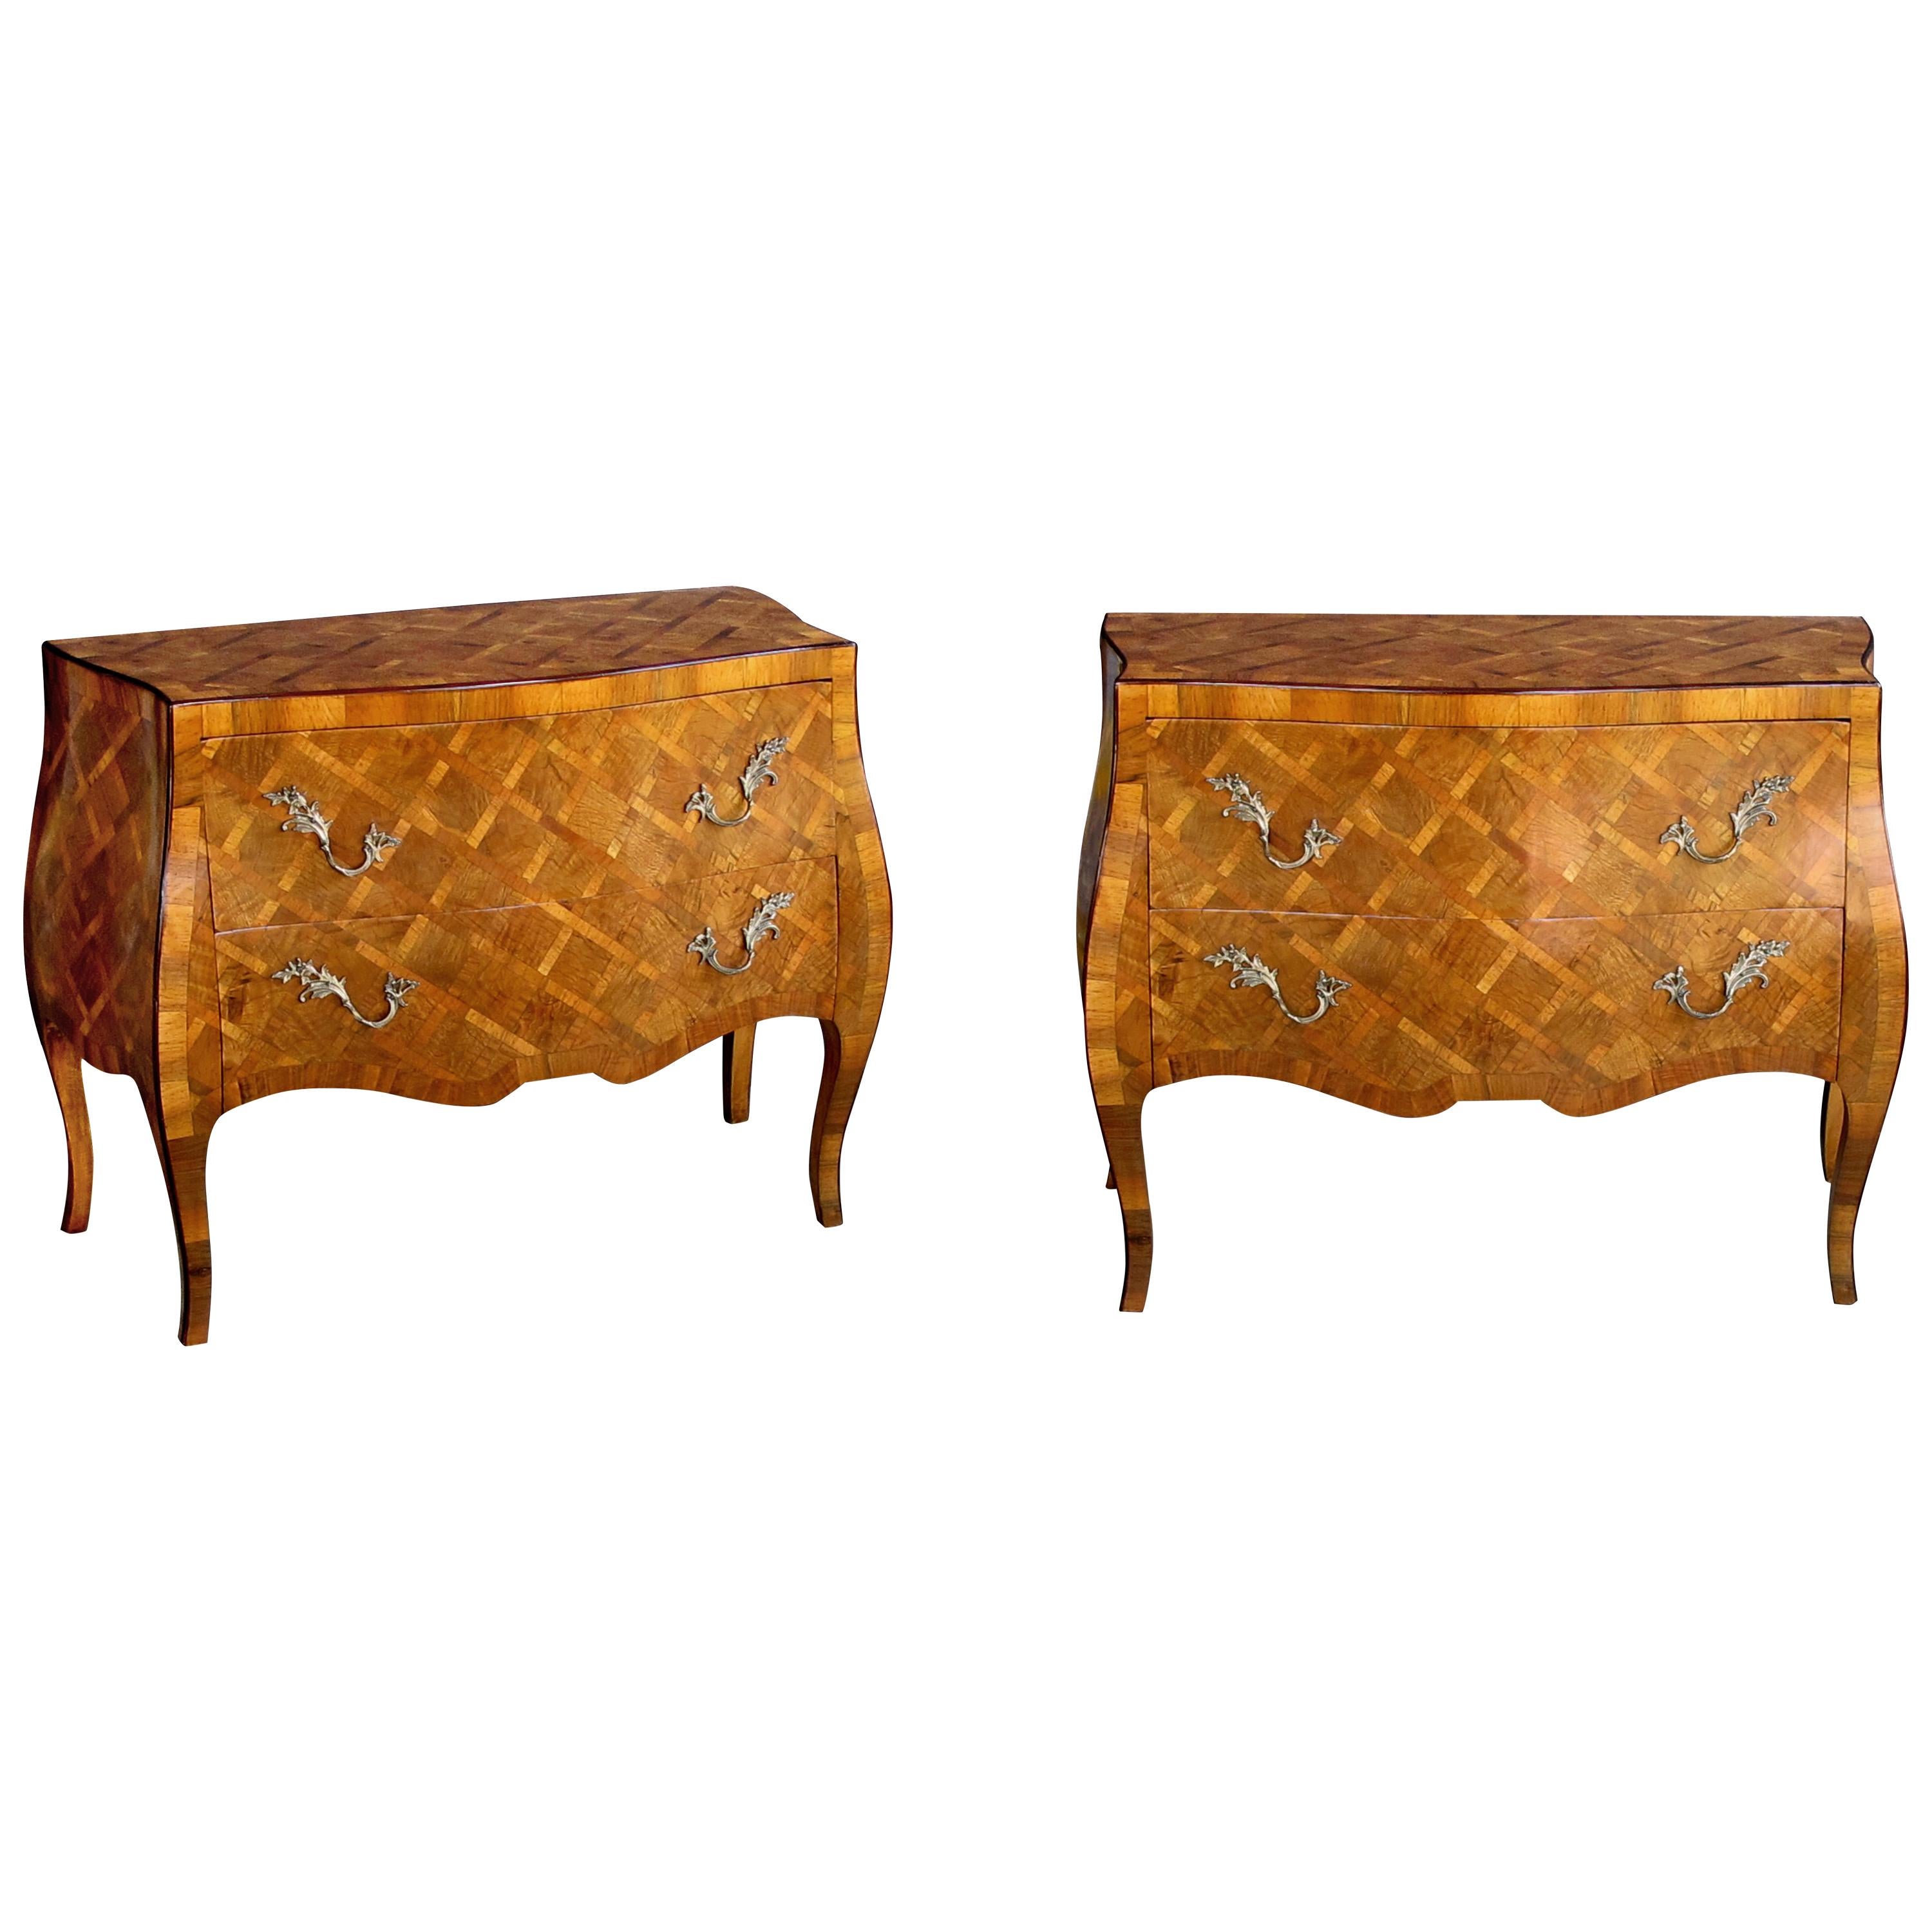 Shapely Pair of Italian Rococo Style Bombe-Form Olivewood Two-Drawer Chests